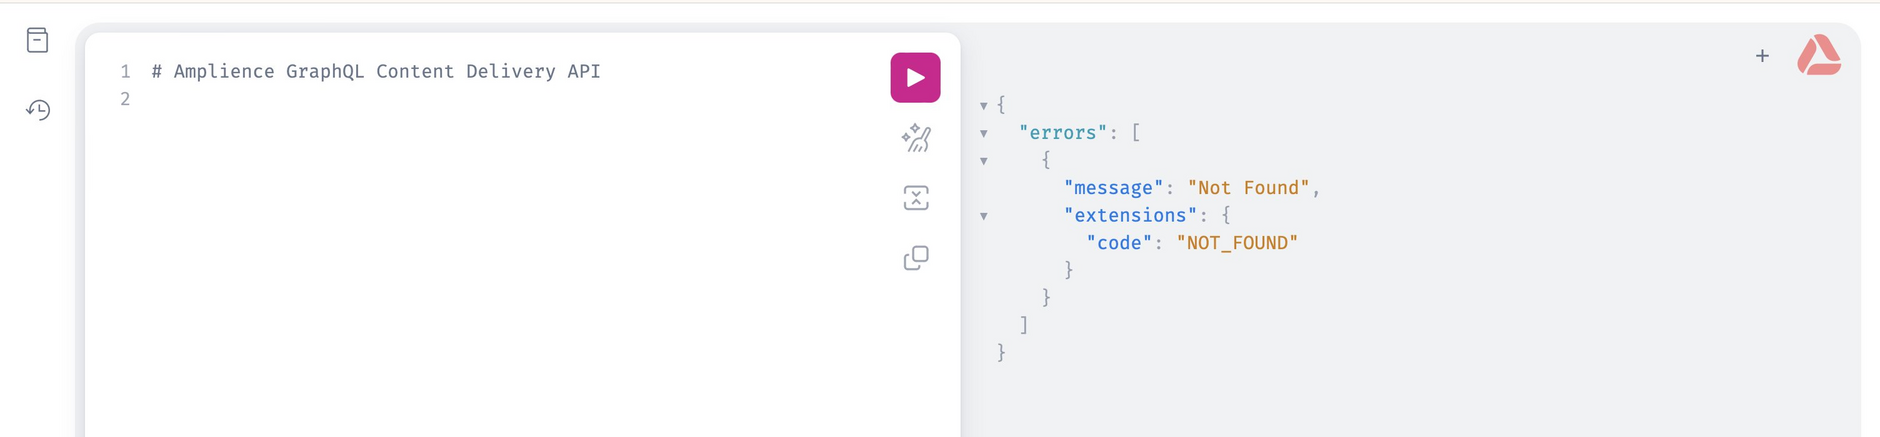 Our tutorial banner request in the GraphQL playground has produced an error.